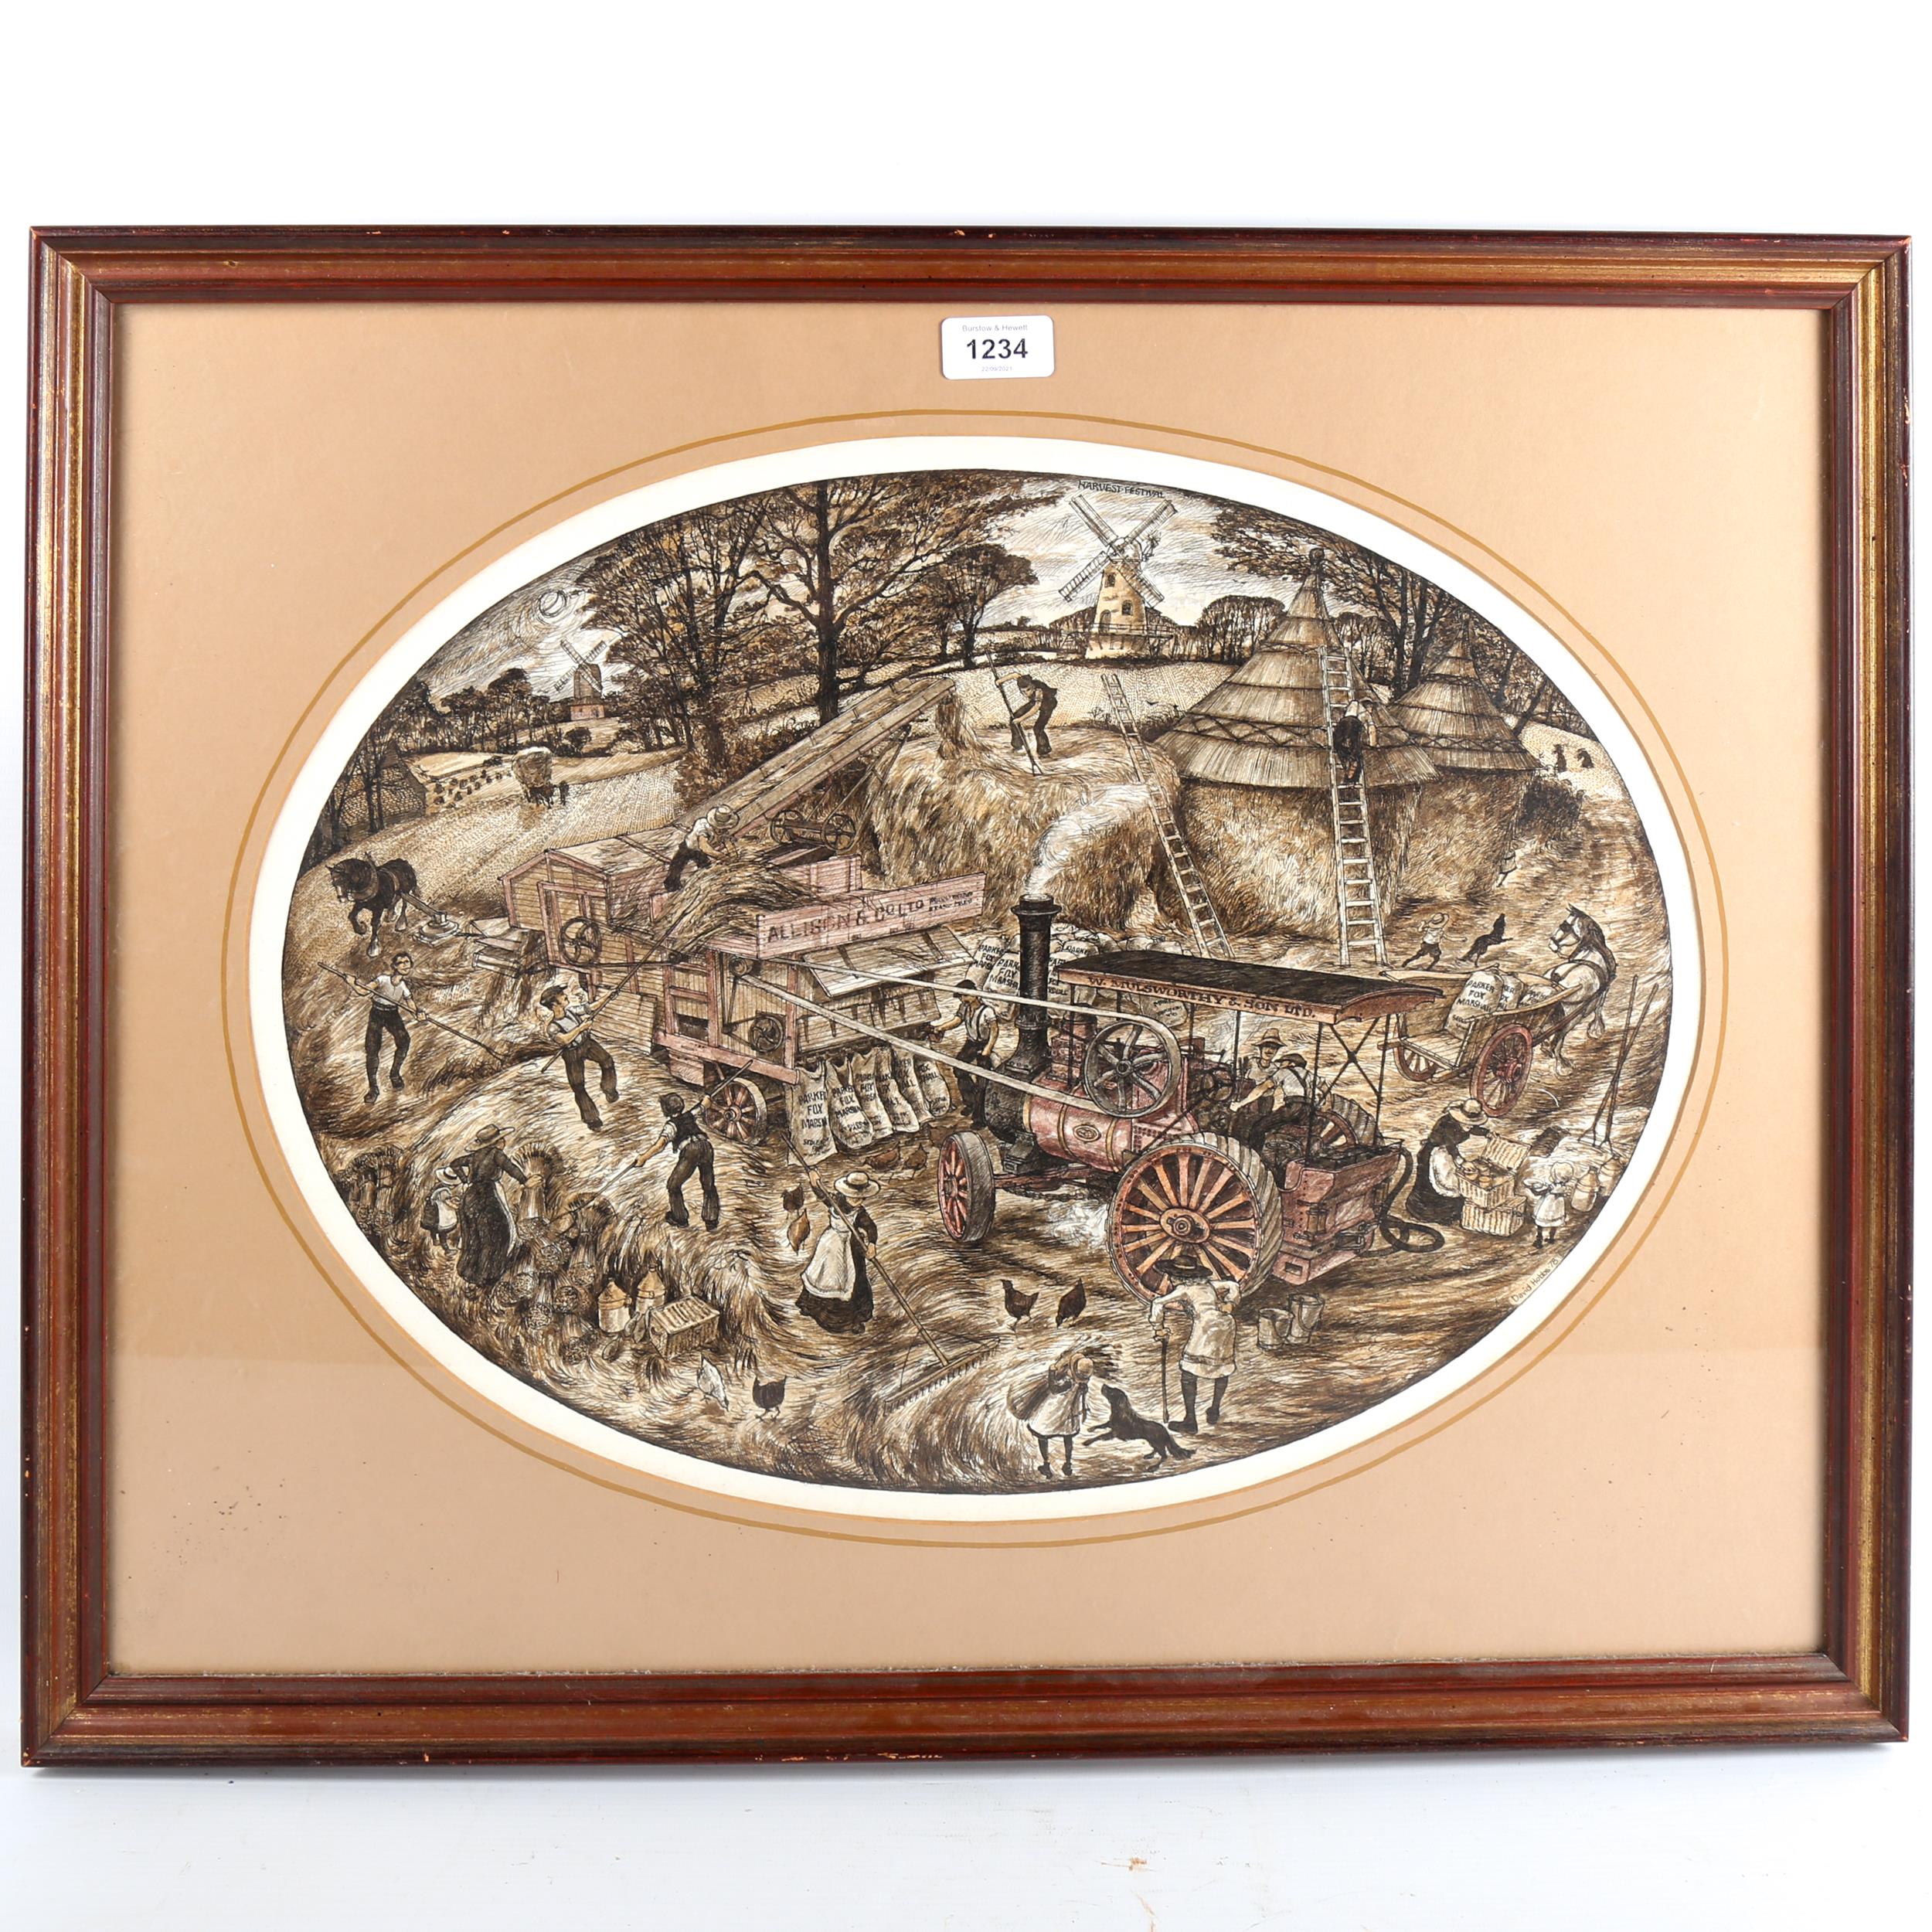 David Hobbs (born 1947), watercolour/ink, farm scene, signed and dated 1978, 35cm x 47cm, framed - Image 2 of 4